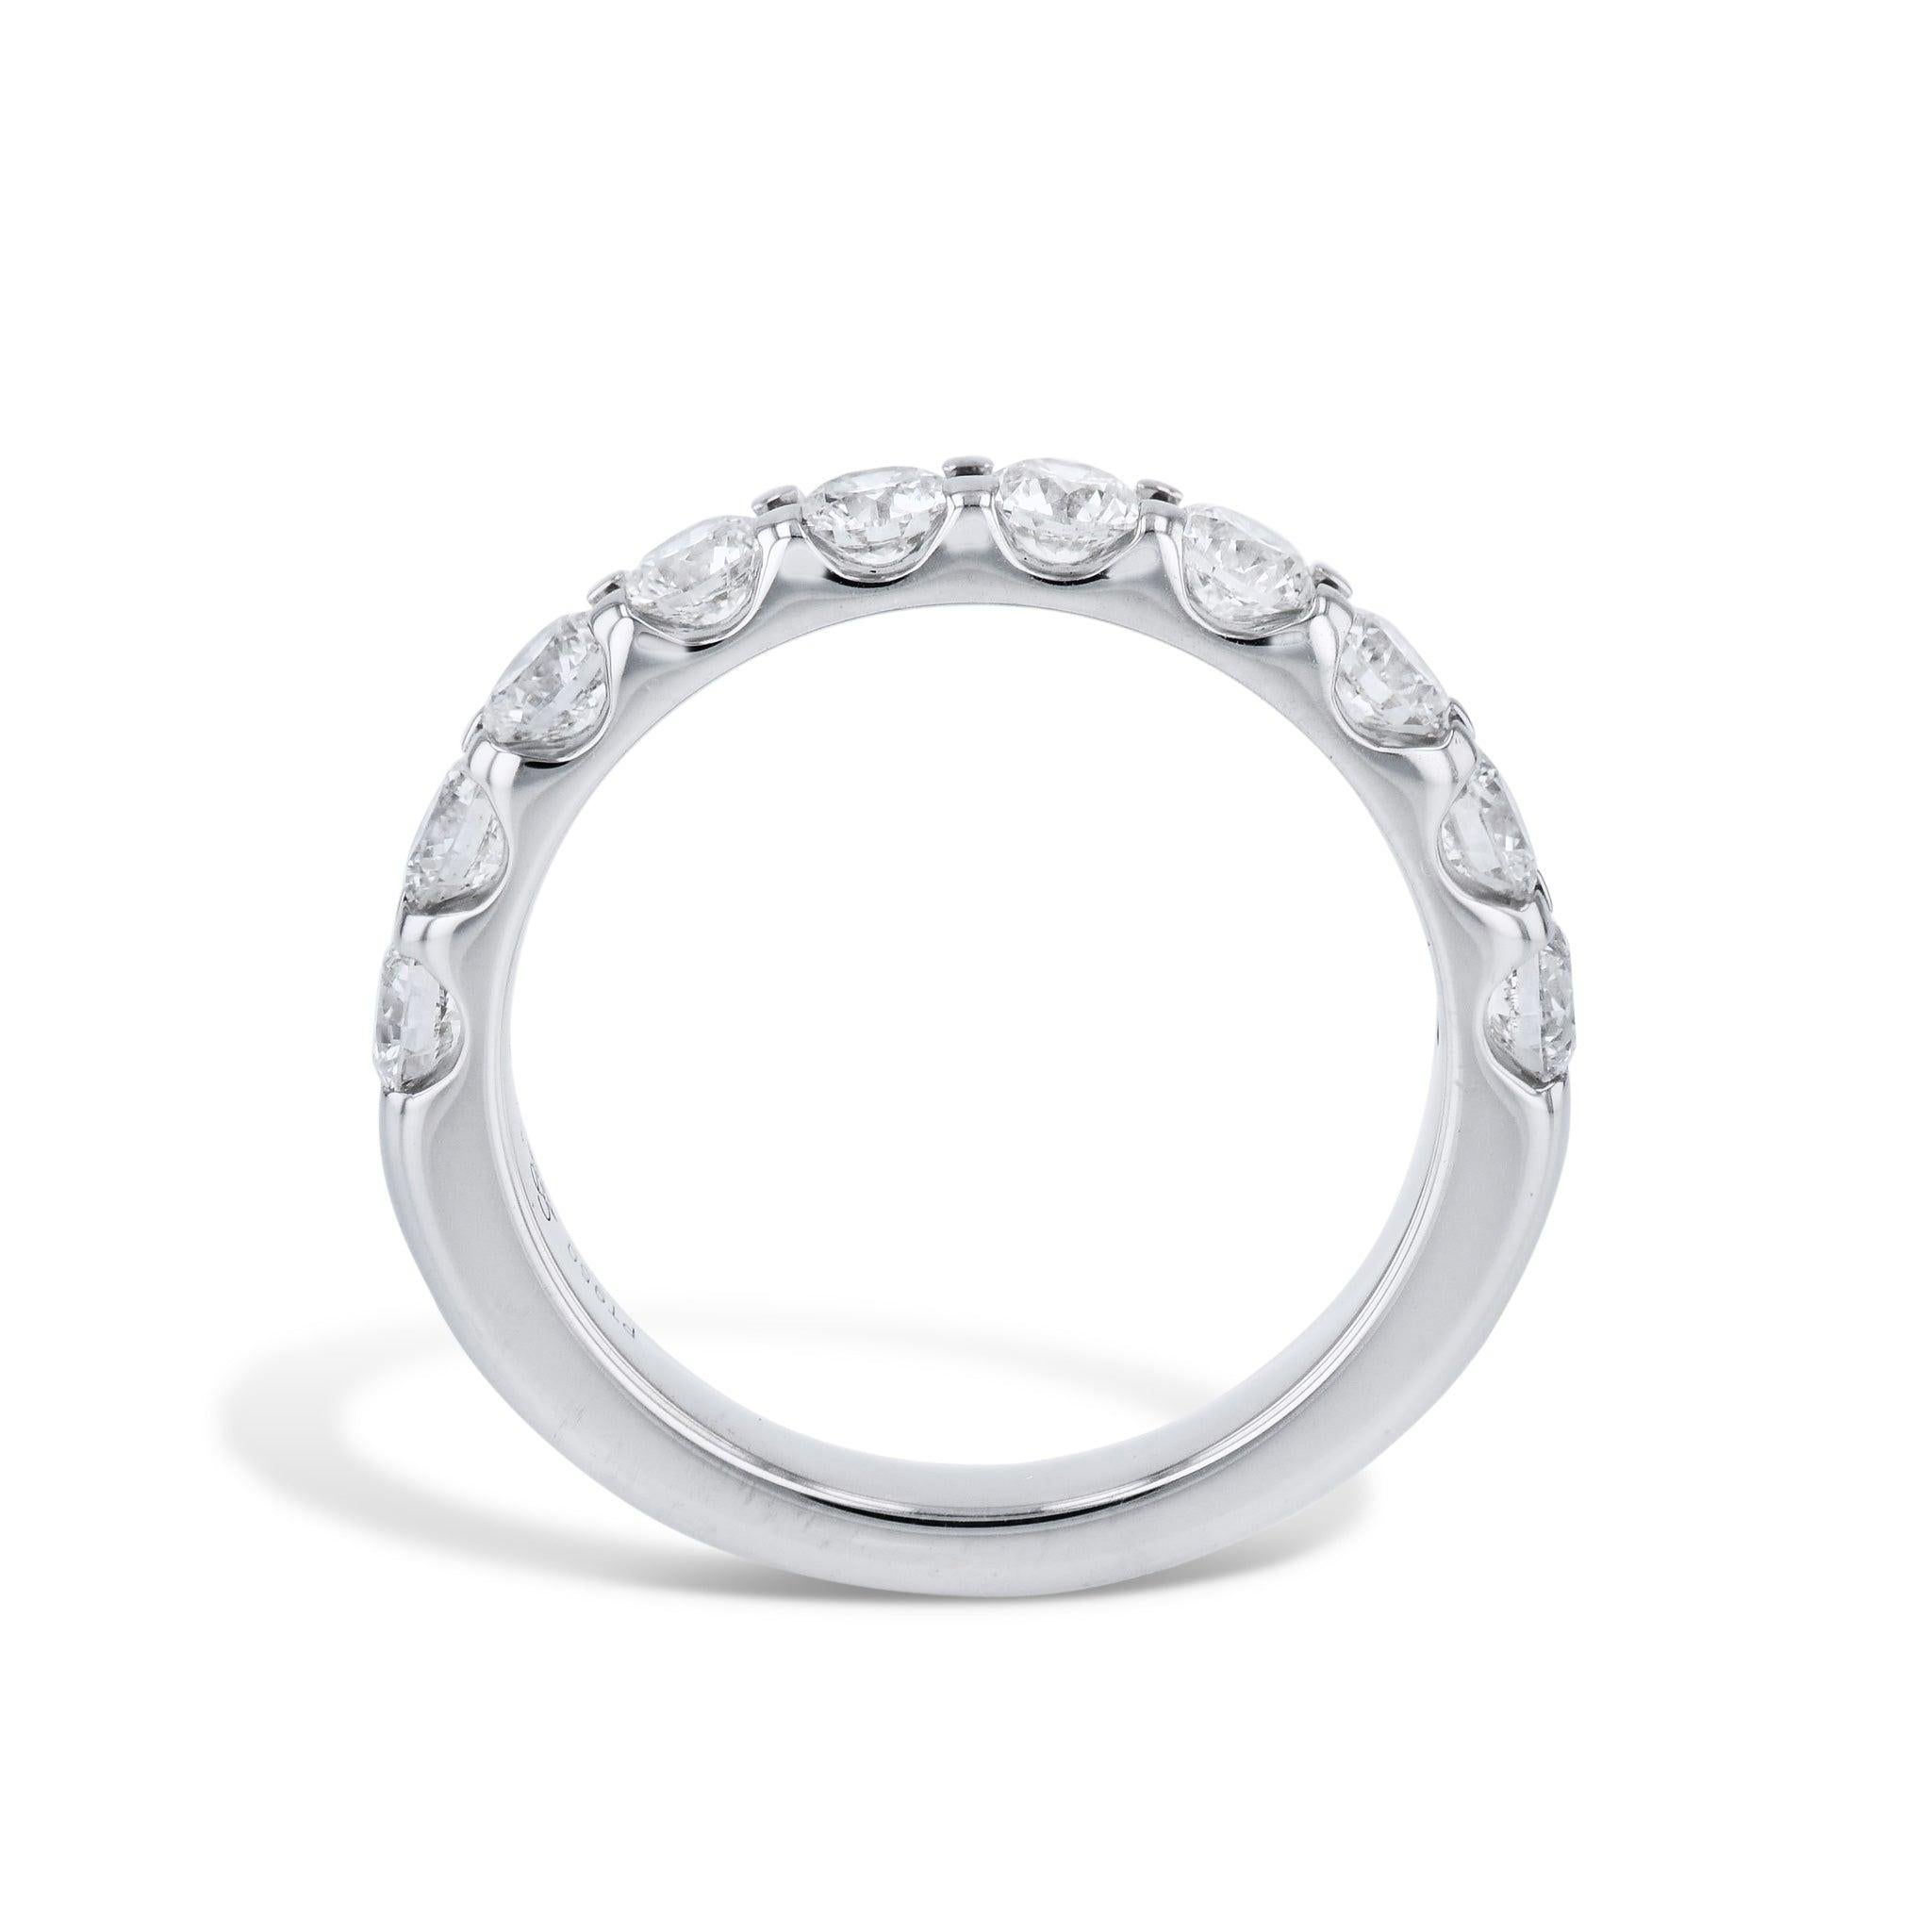 This exquisite Round Diamond Platinum Estate Eternity Band is a timeless testament to the beauty of diamonds, with 10 precious Round Diamonds. Stunningly crafted to Size 7, it's sure to become an admired family heirloom!
Round Diamond Platinum